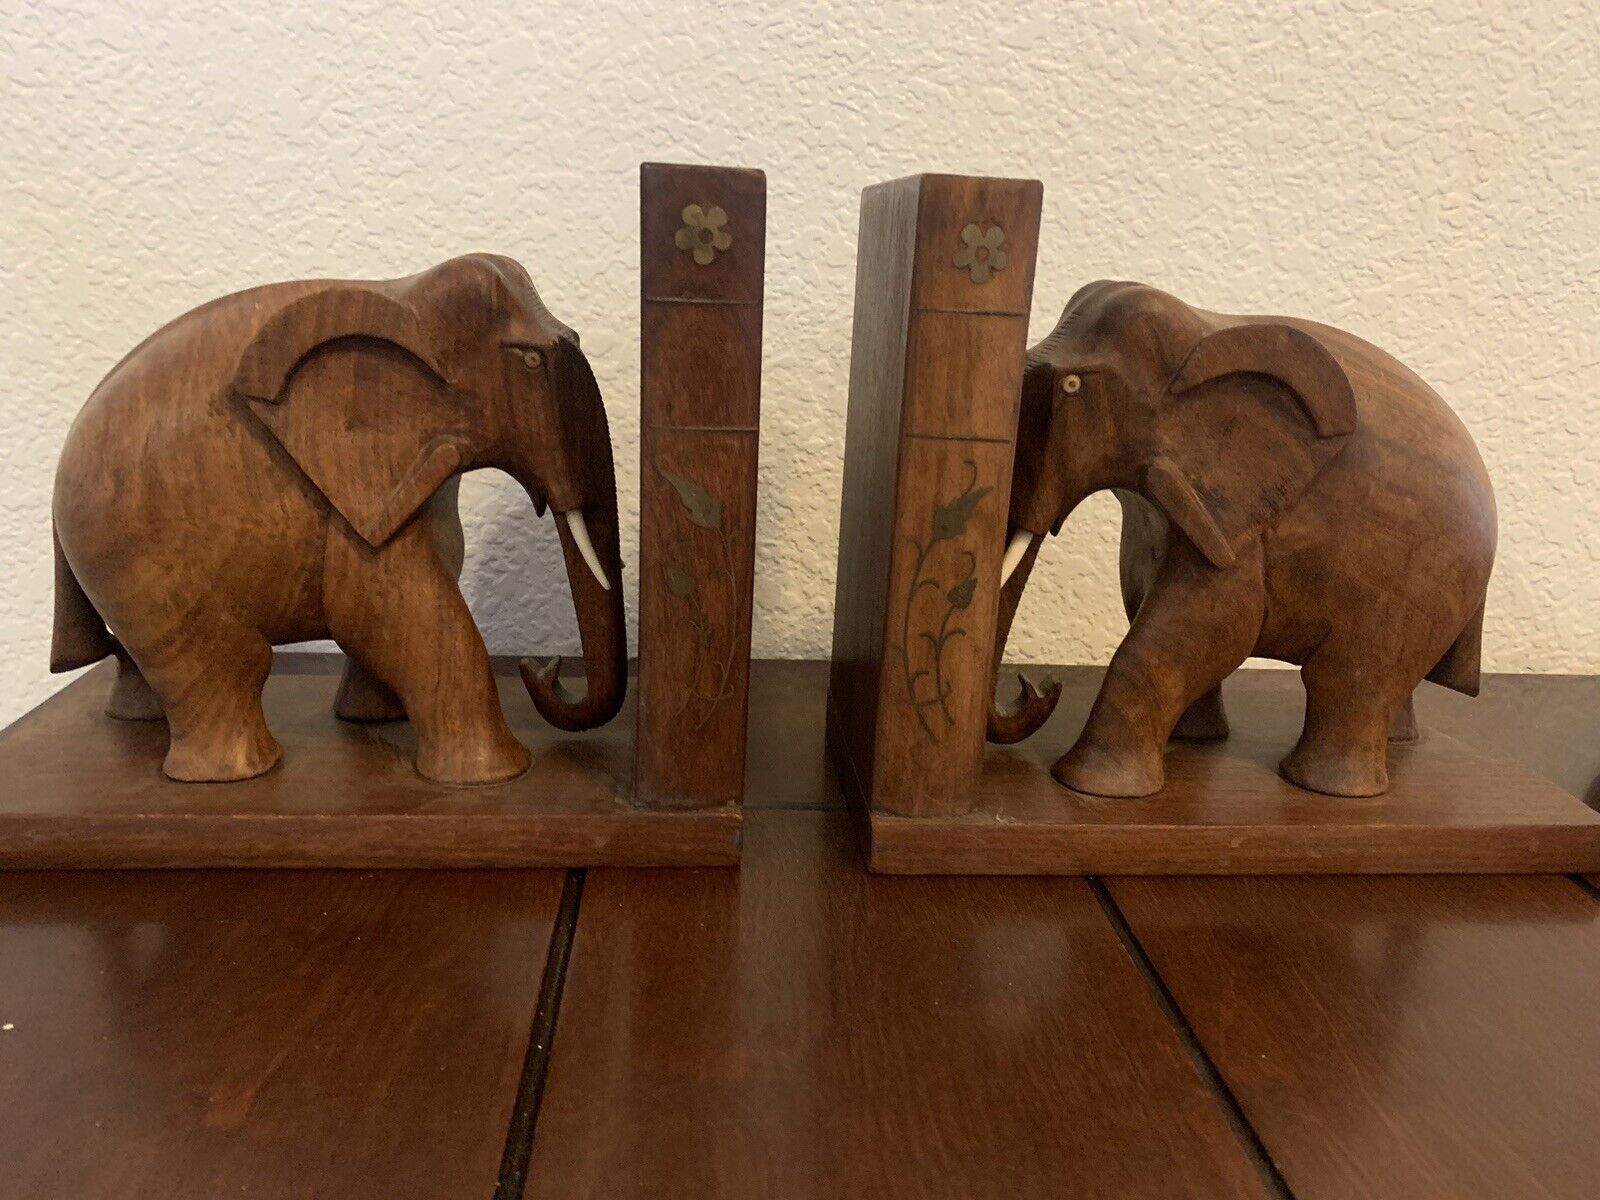 Vintage Carved Wood Elephant Bookends Hand Crafted 9 x 7.5